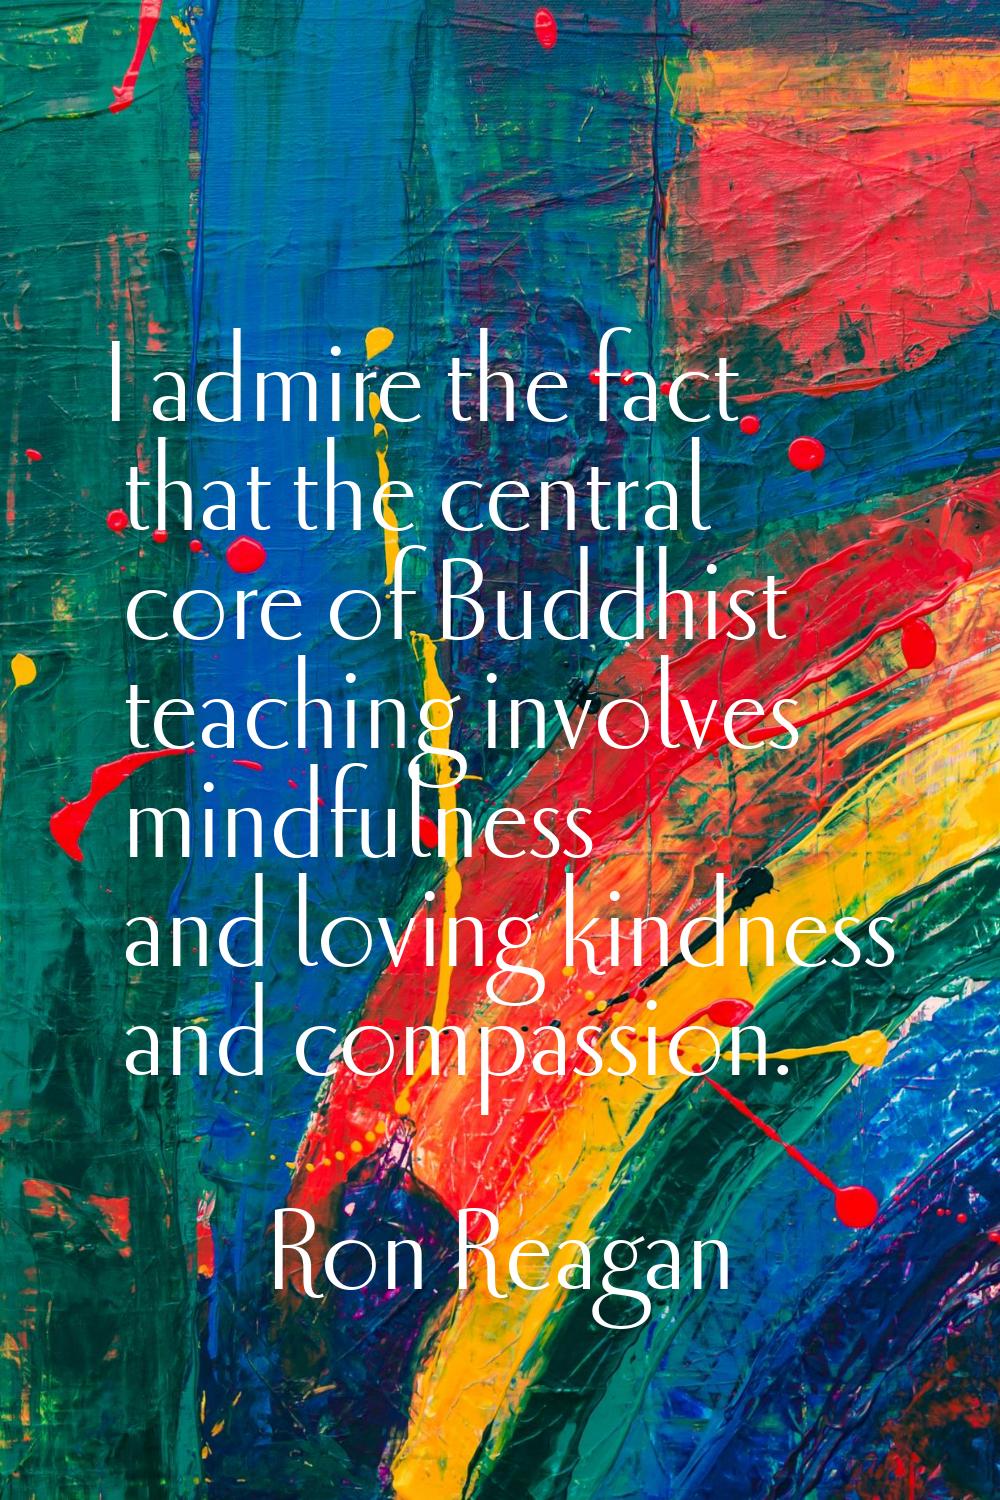 I admire the fact that the central core of Buddhist teaching involves mindfulness and loving kindne